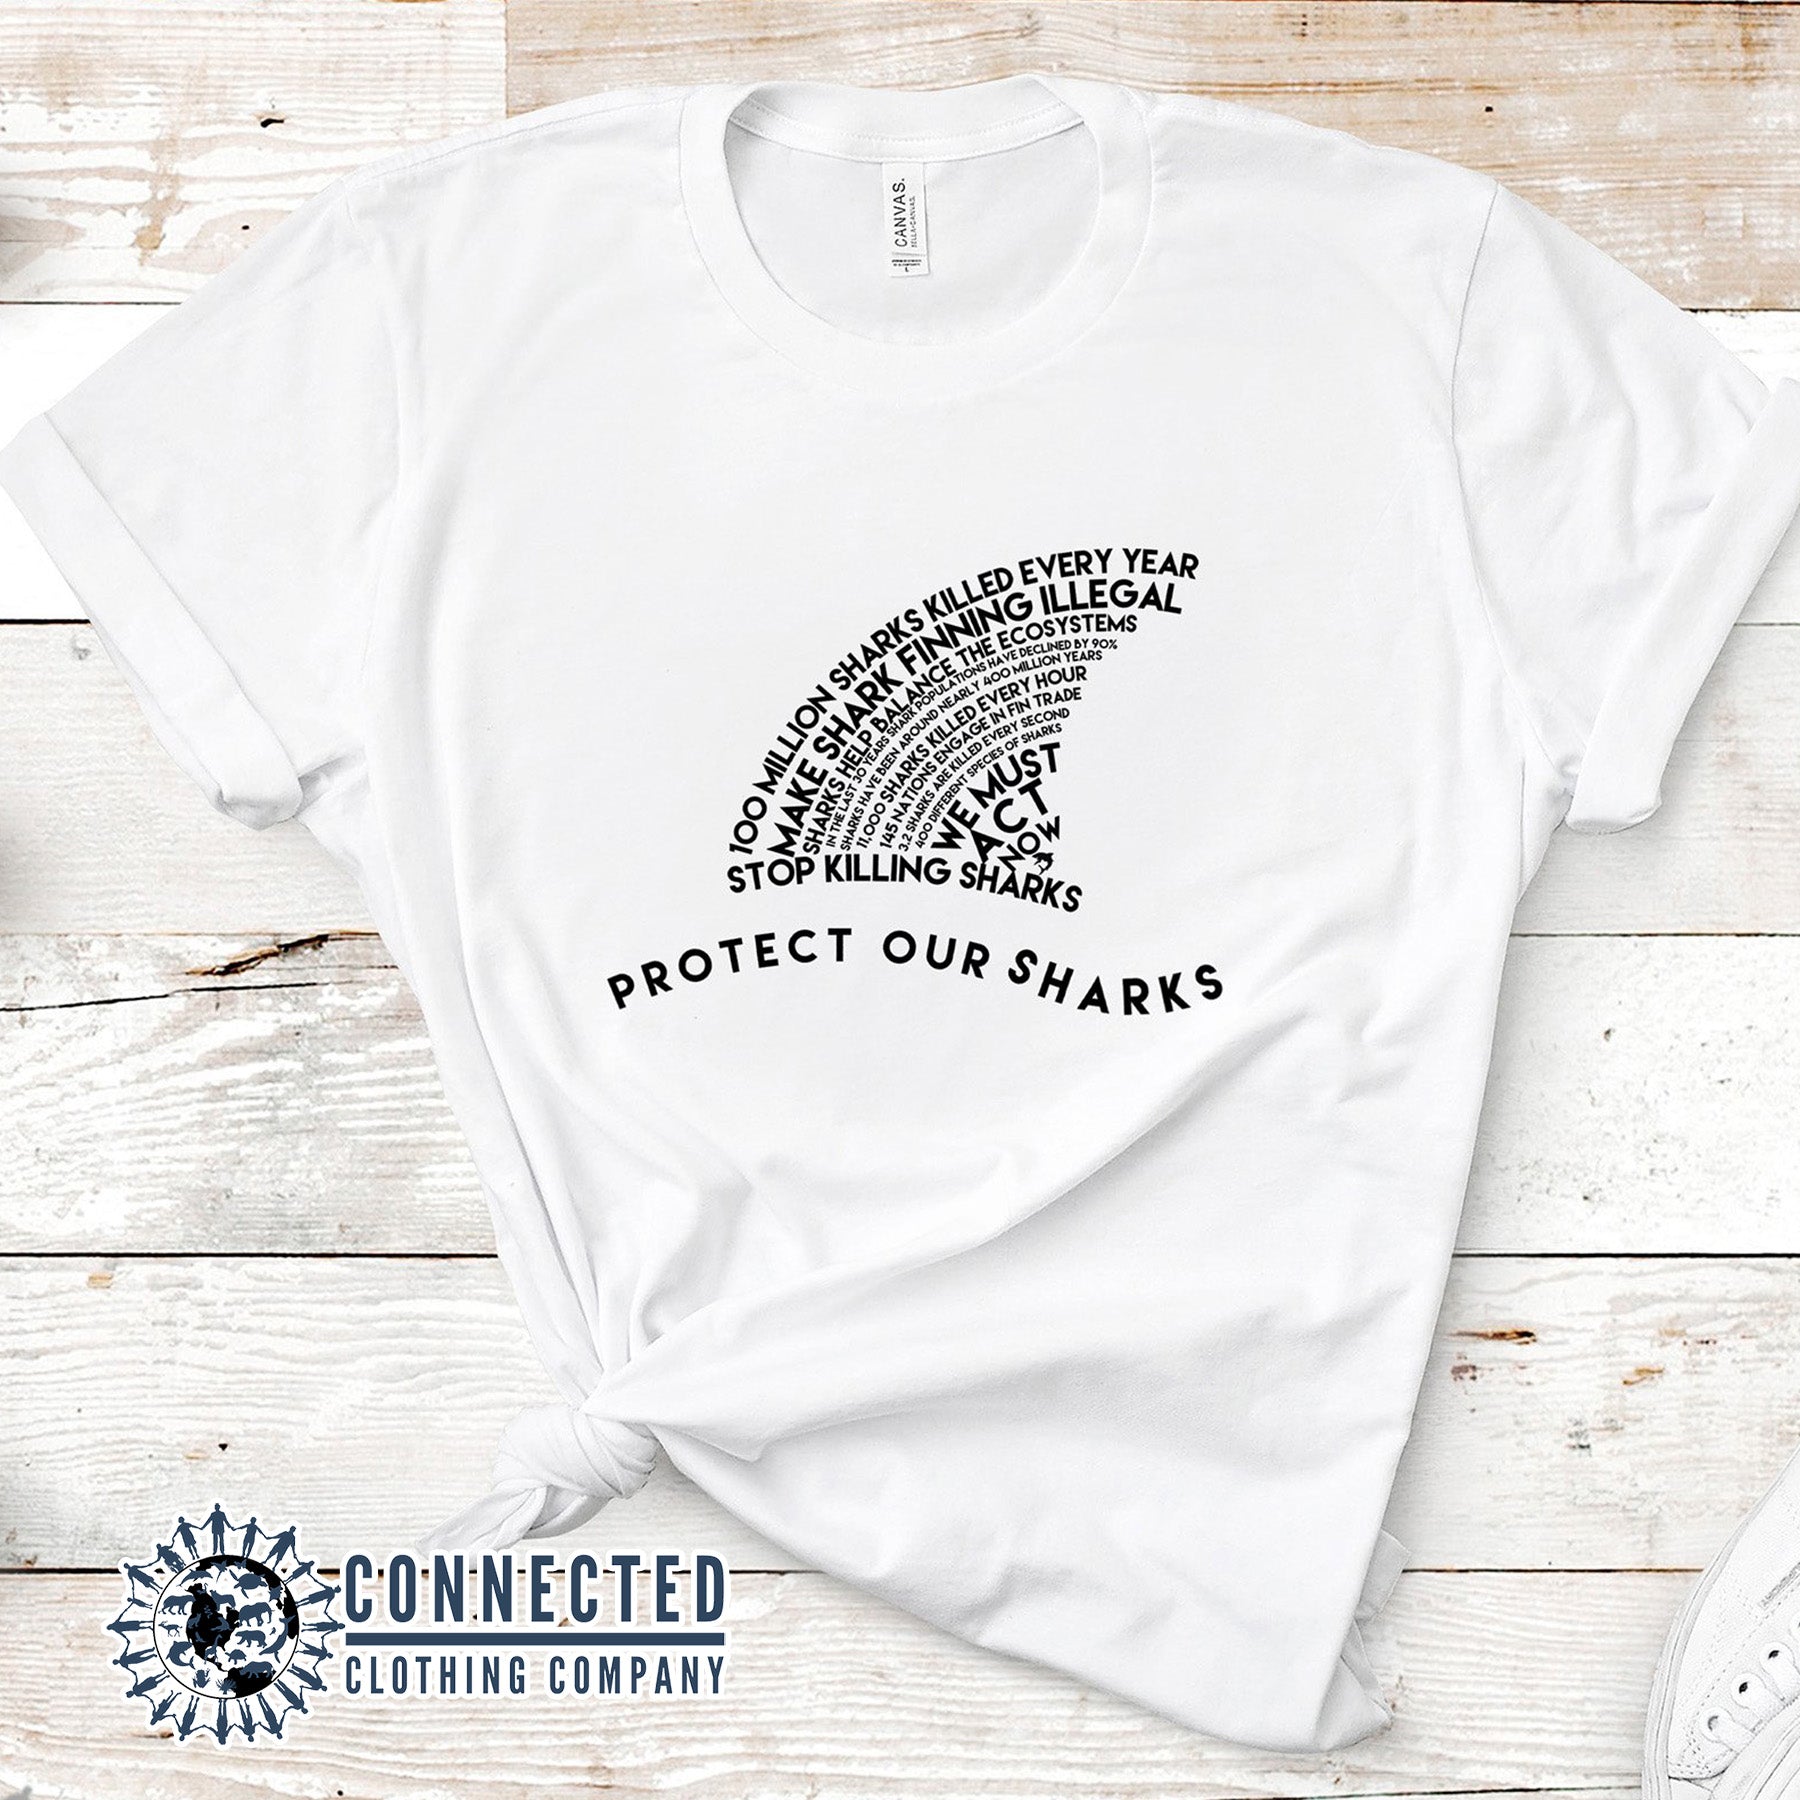 White Protect Our Sharks Short-Sleeve Tee - mirandotubolsillo - Ethically and Sustainably Made - 10% of profits donated to shark conservation and ocean conservation